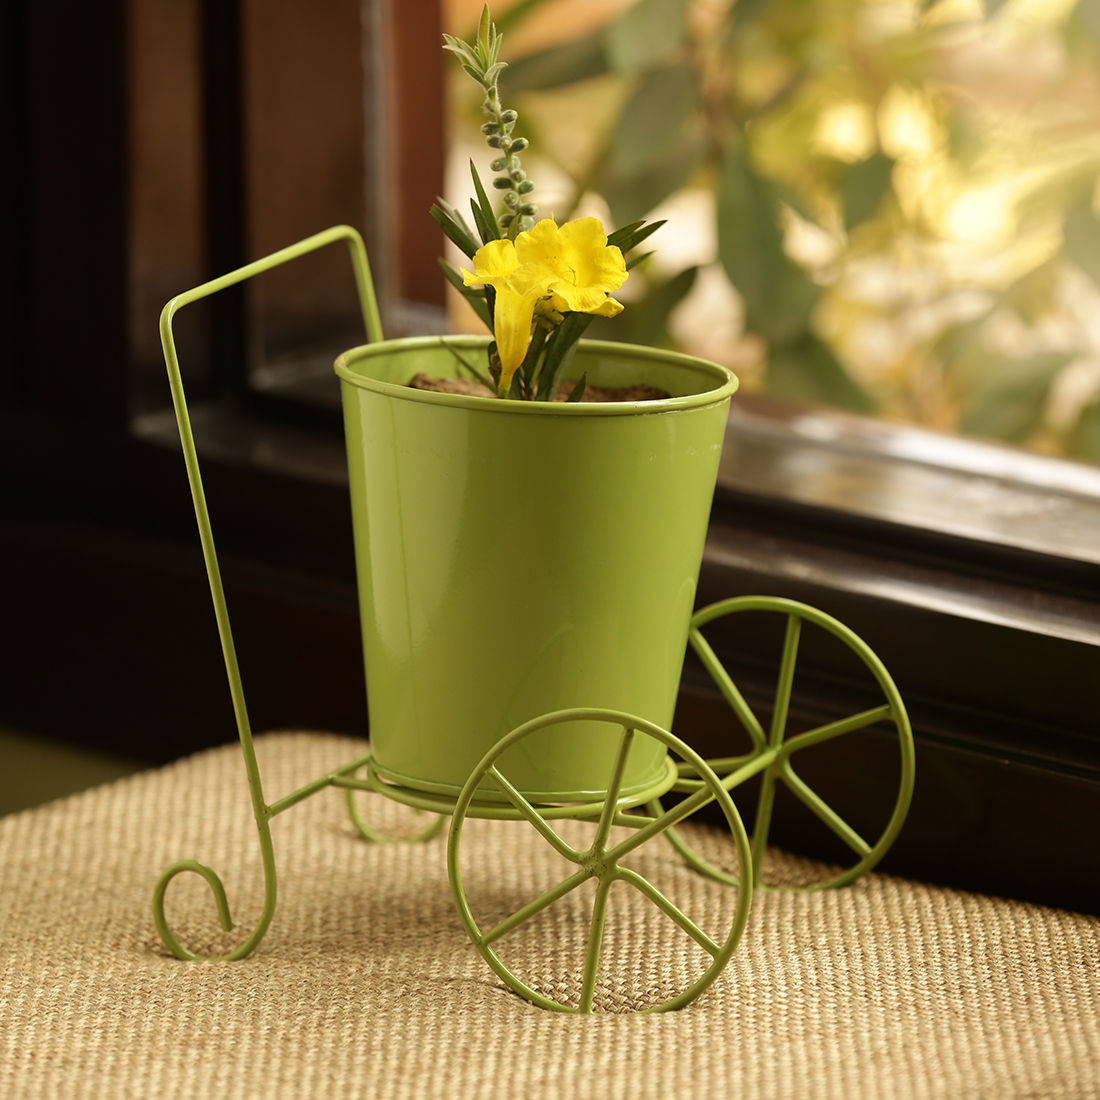 ExclusiveLane Plant On Wheels' Table Cum Floor Planter Pot In Glossy Grass Green